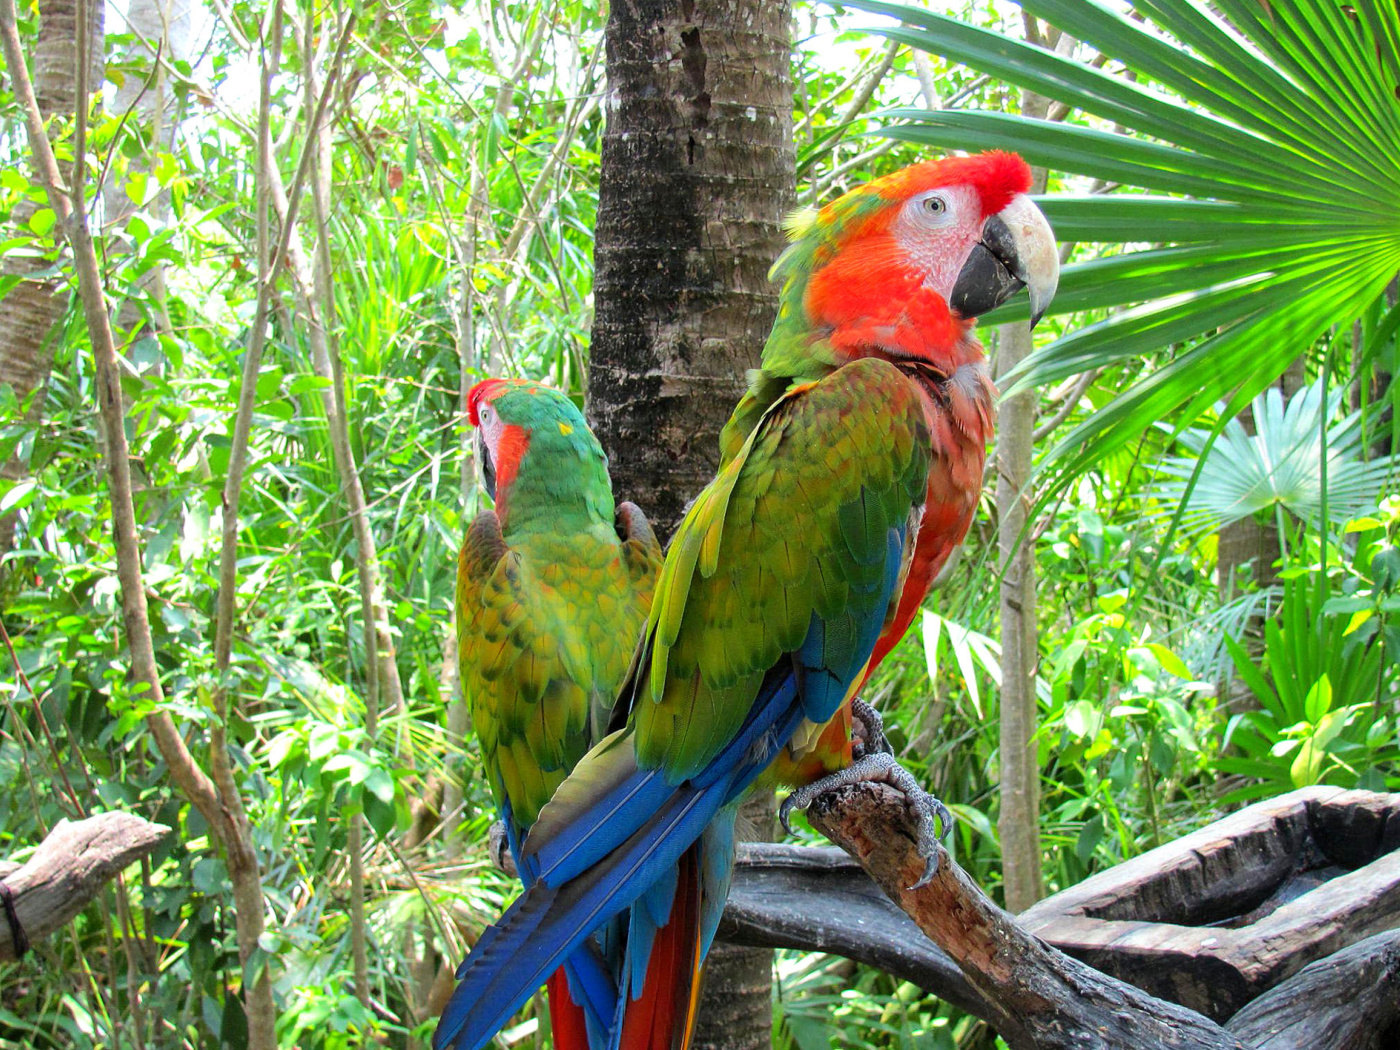 Macaw parrot Amazon forest screenshot #1 1400x1050